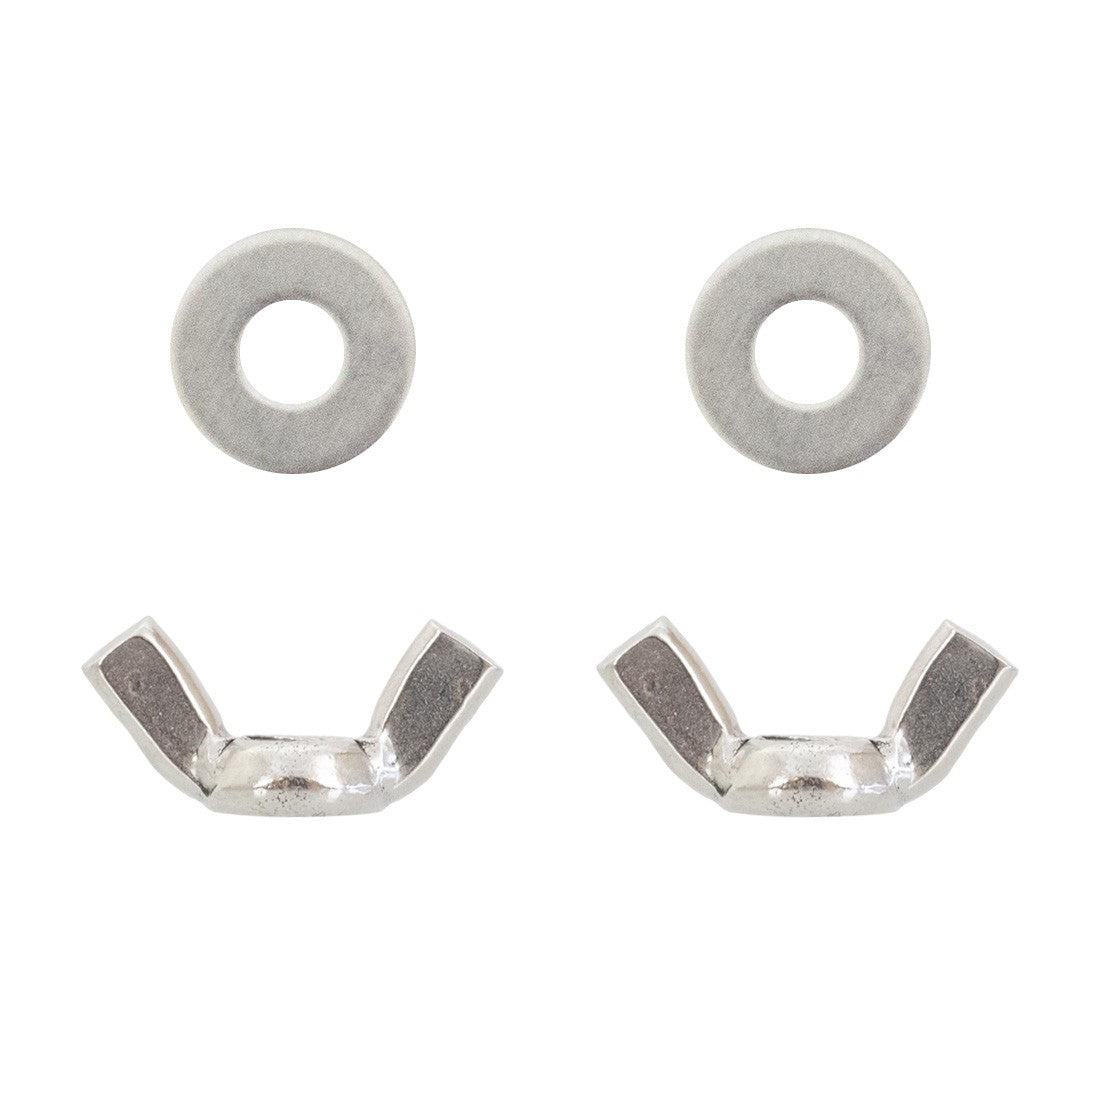 XERO Replacement Wing Nuts for Bronze Wool Pad Holder - Dual Wing Nuts (Bottom), Dual Washers (Top)